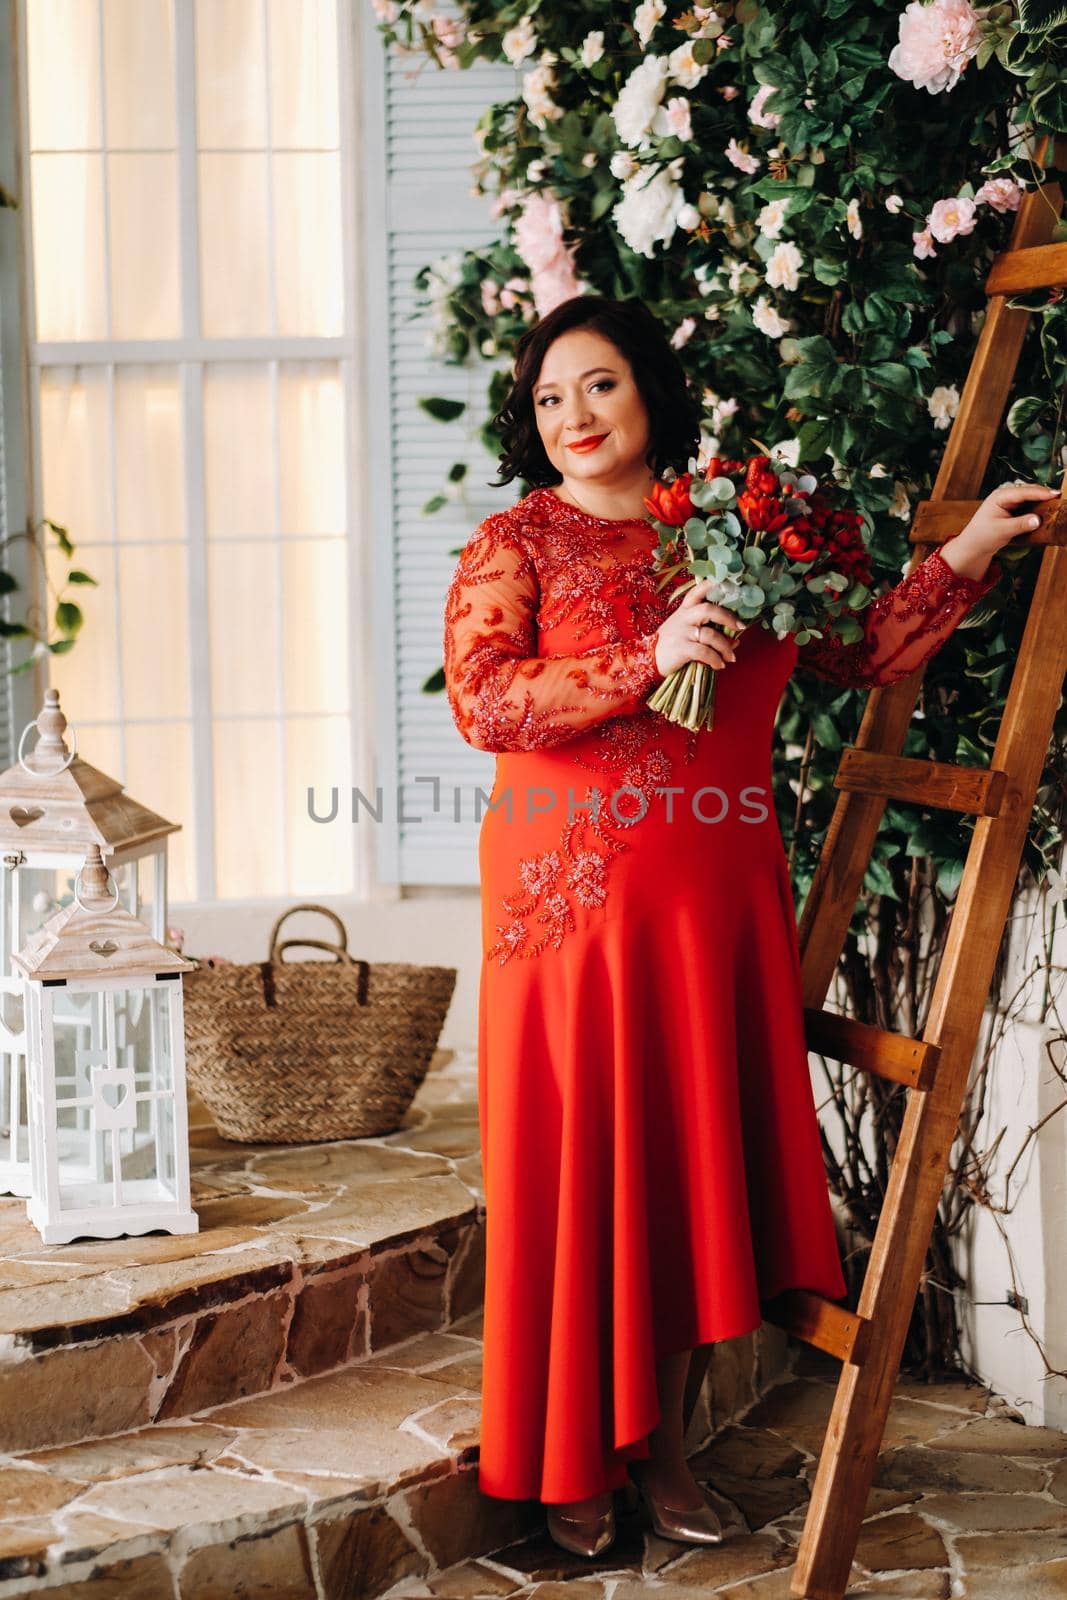 a woman in a red dress stands and holds a bouquet of red roses and strawberries in the interior